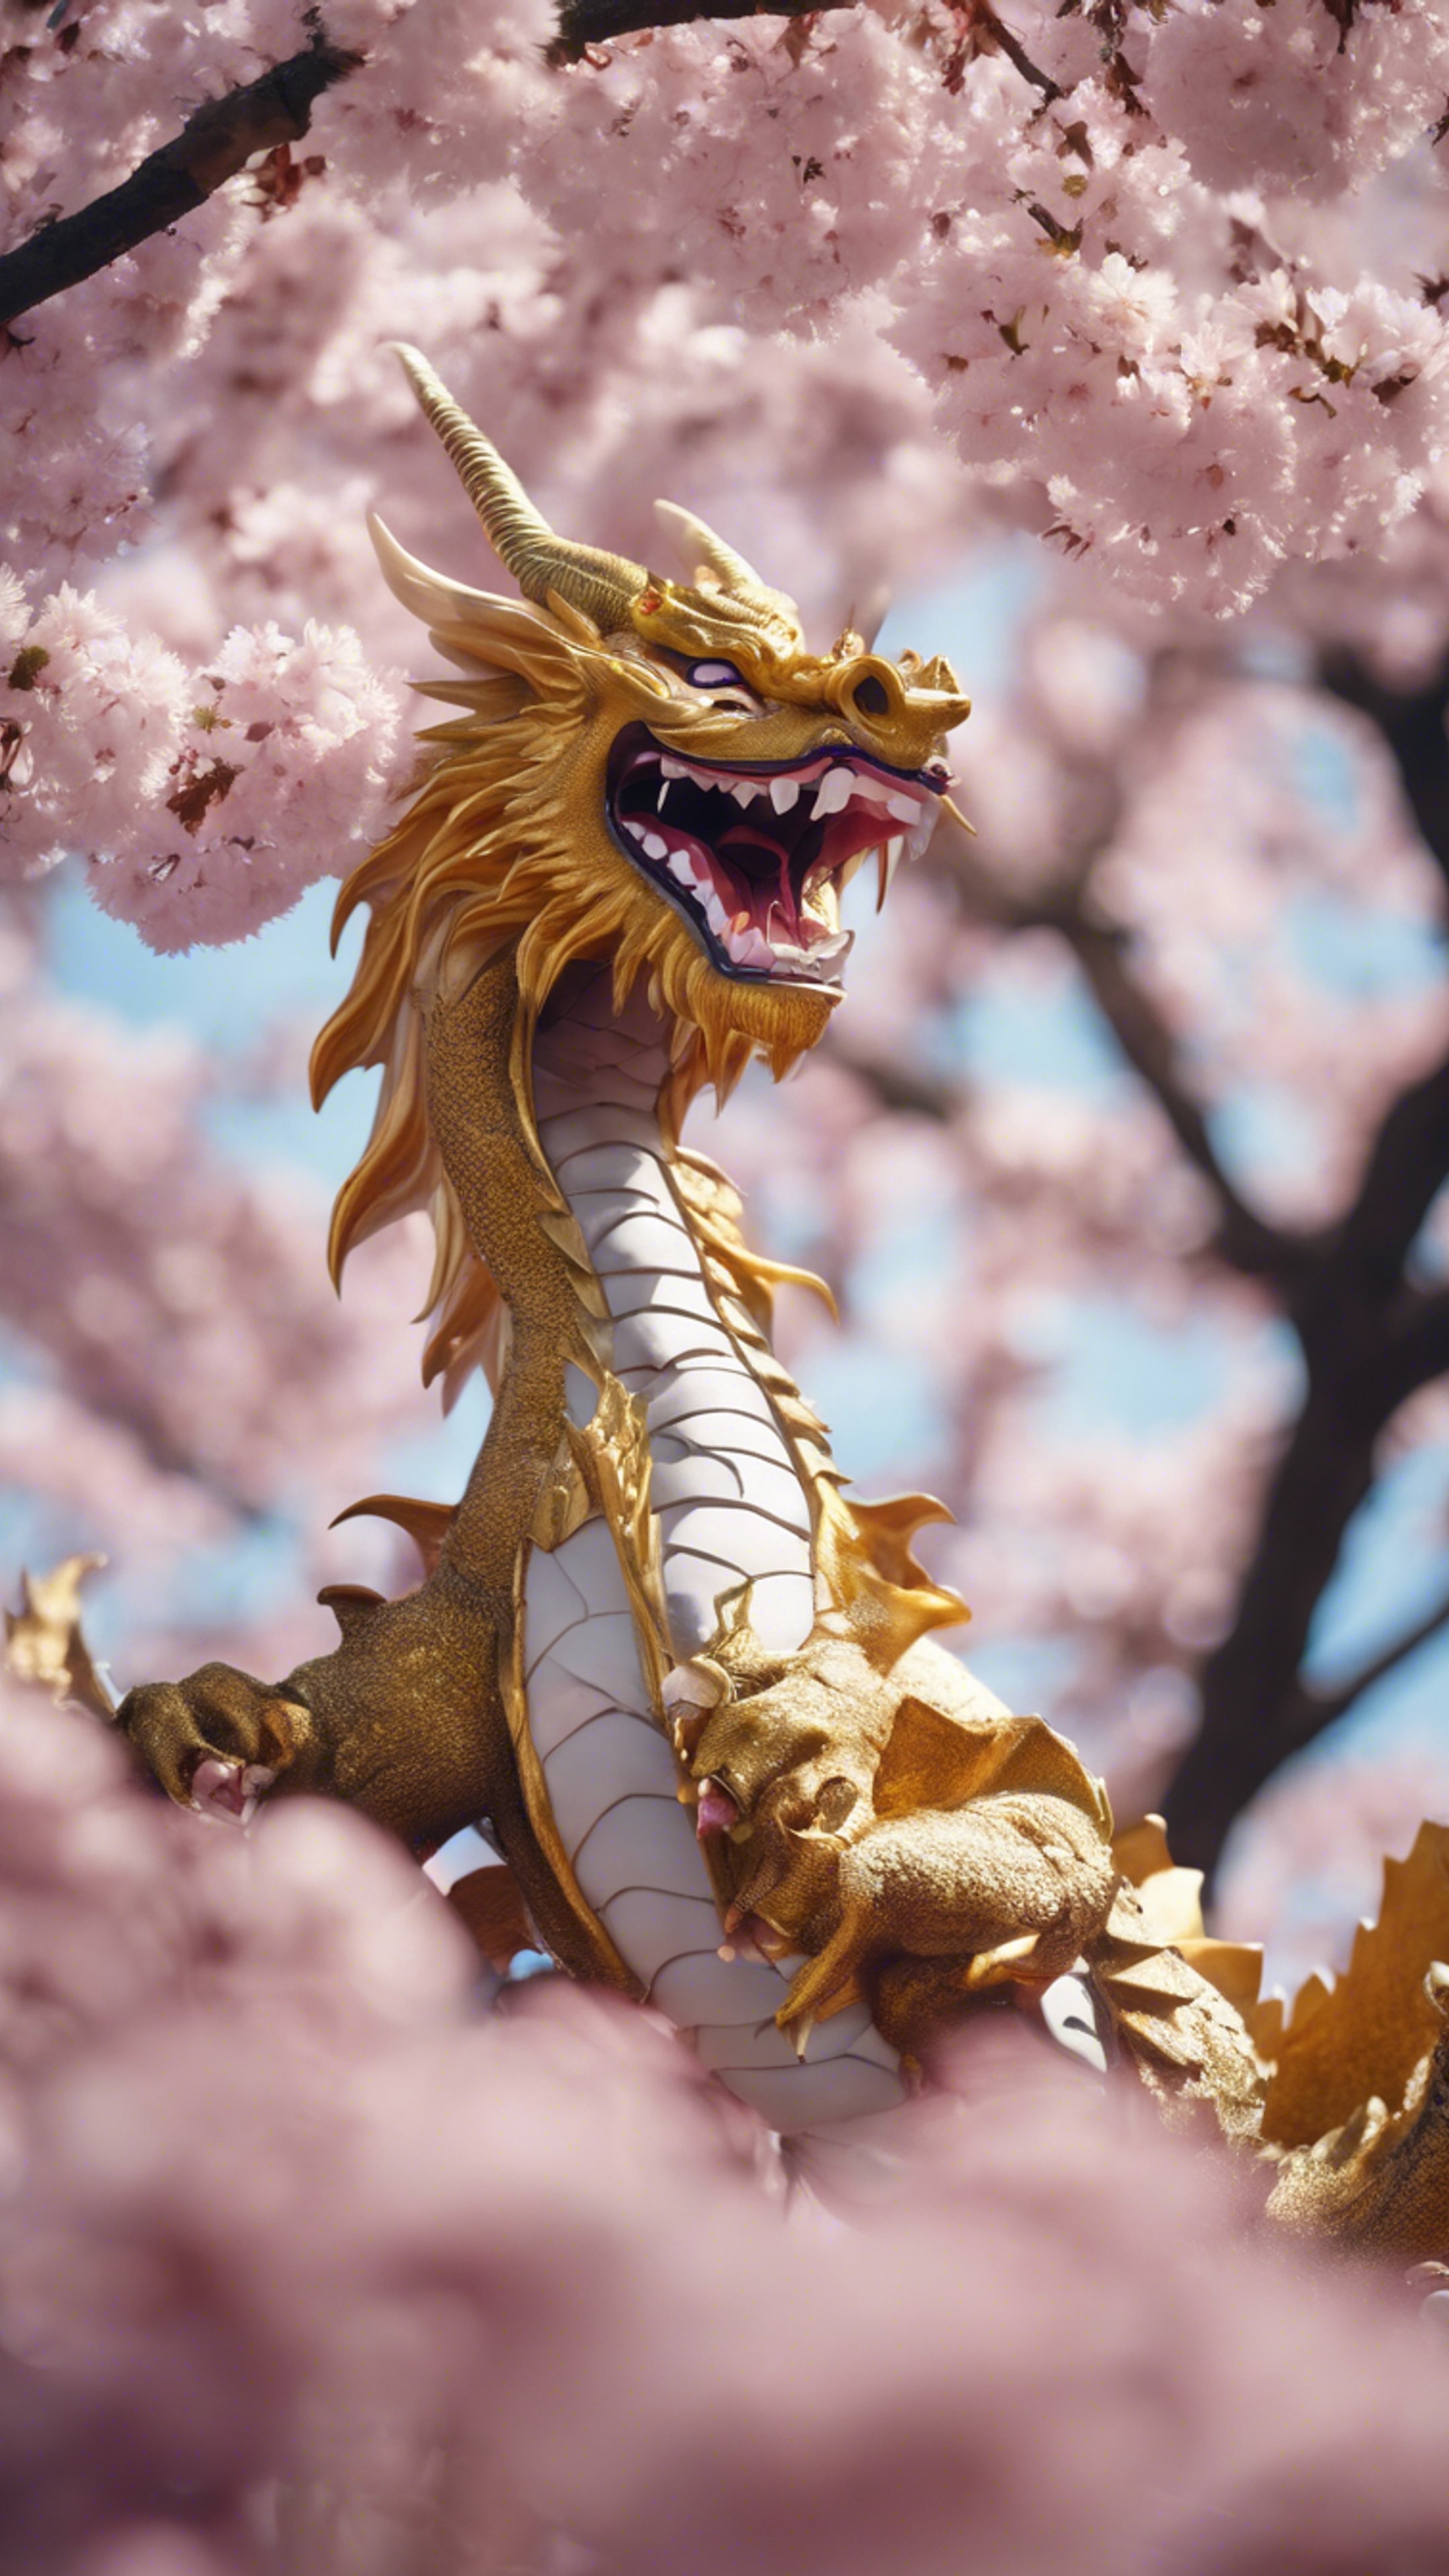 A playful Japanese dragon frolicking in the cherry blossom festival. Behang[dfac1438ceb04769bc5b]